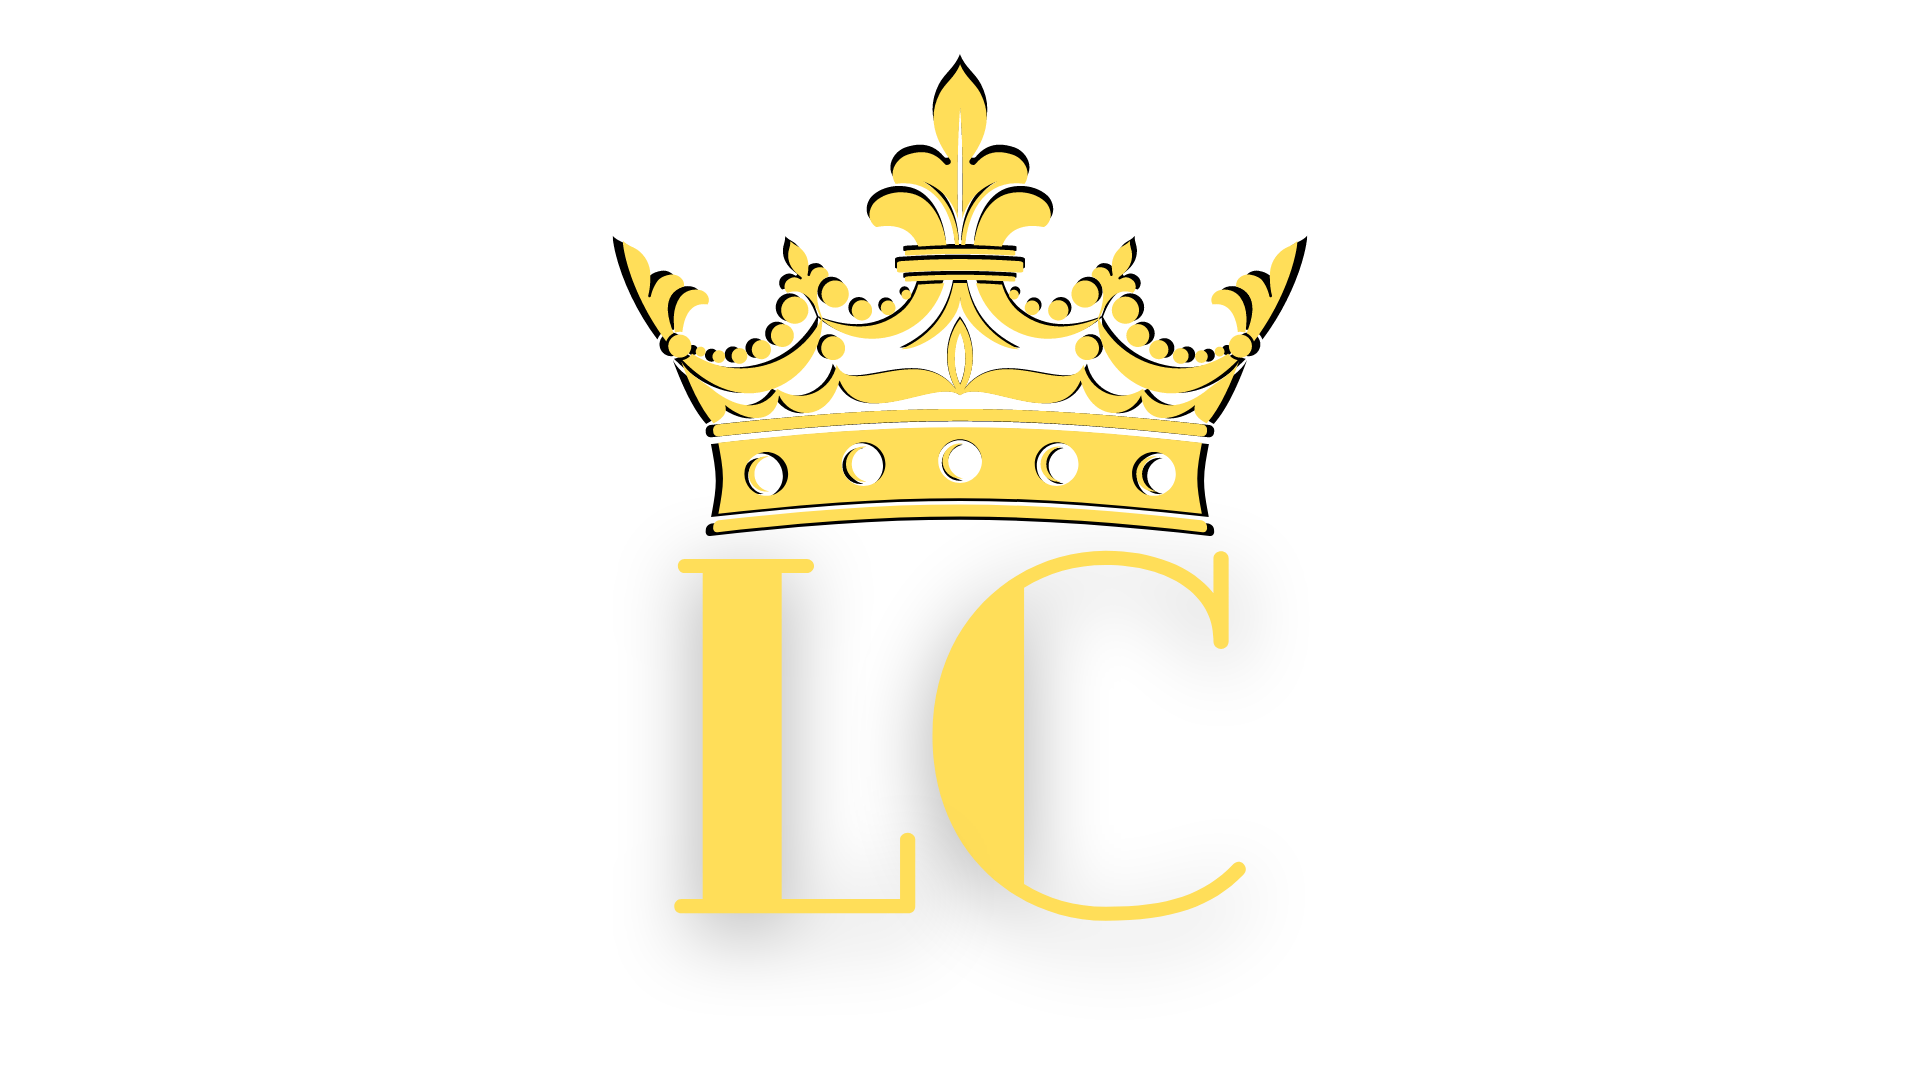 Local Crown, LLC was created to help business owners claim their crown online while focusing on what they do best. Local Crown brings business owners the growth solutions they need from social media marketing to SEO and web design they have you covered.